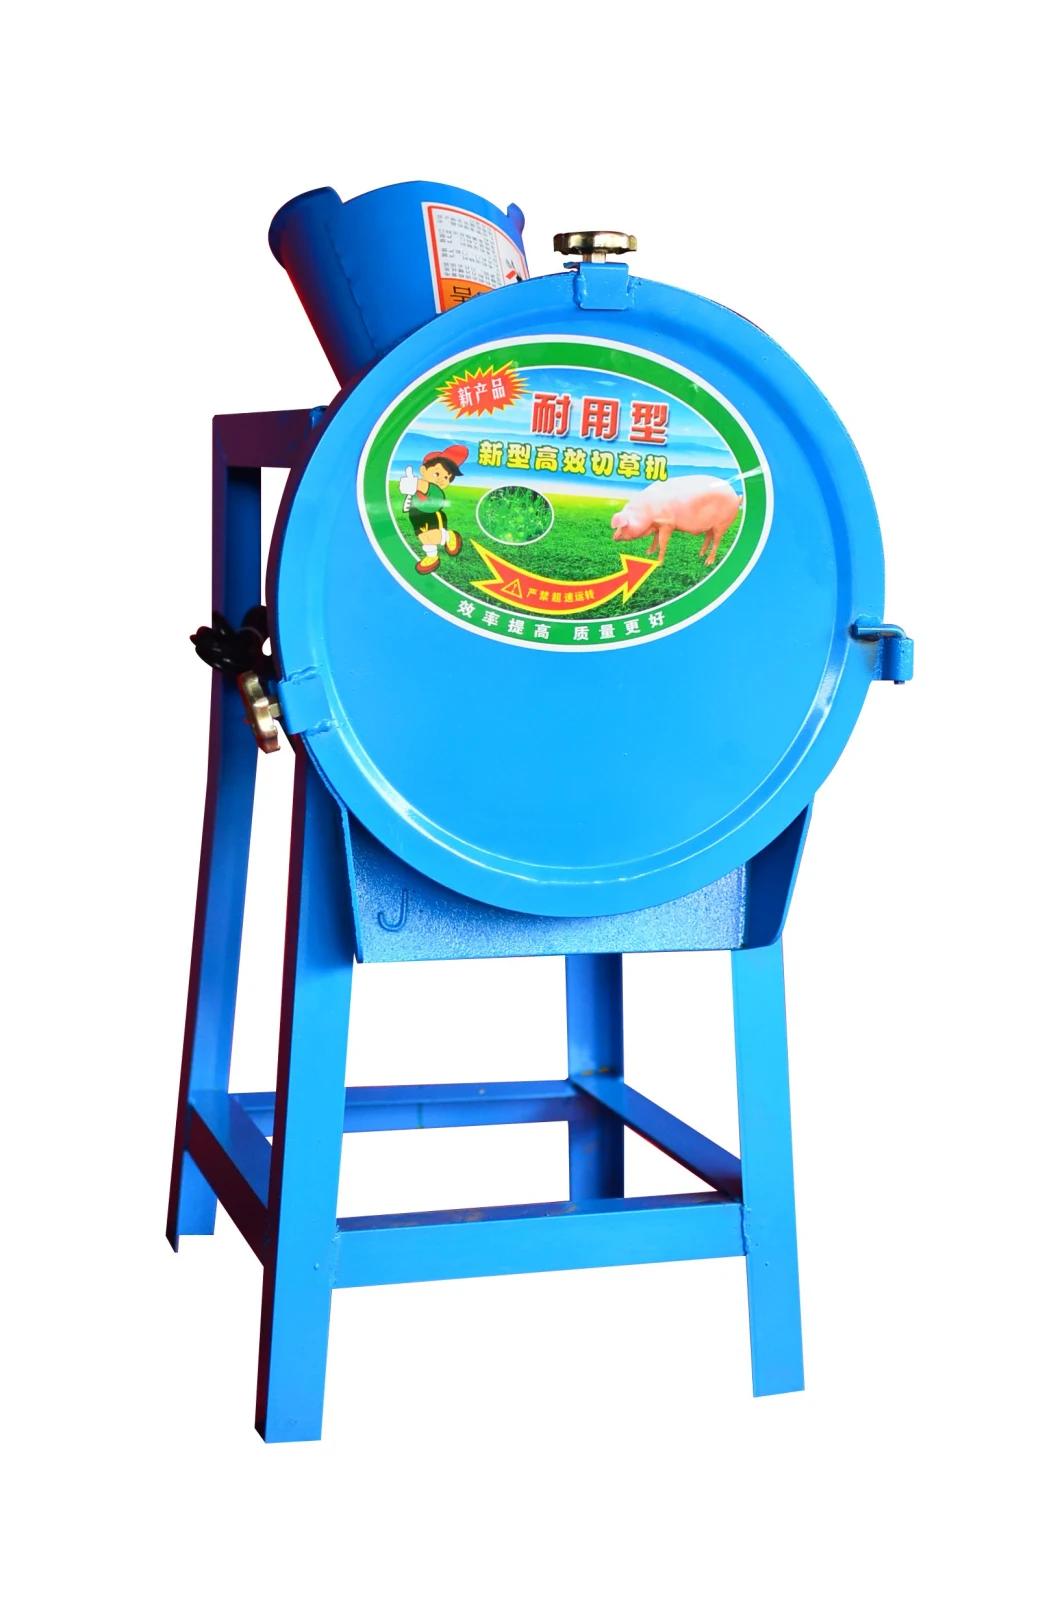 Fodder Cutter Machine for Farm Animal Feeding with The Advantage of Low Cost